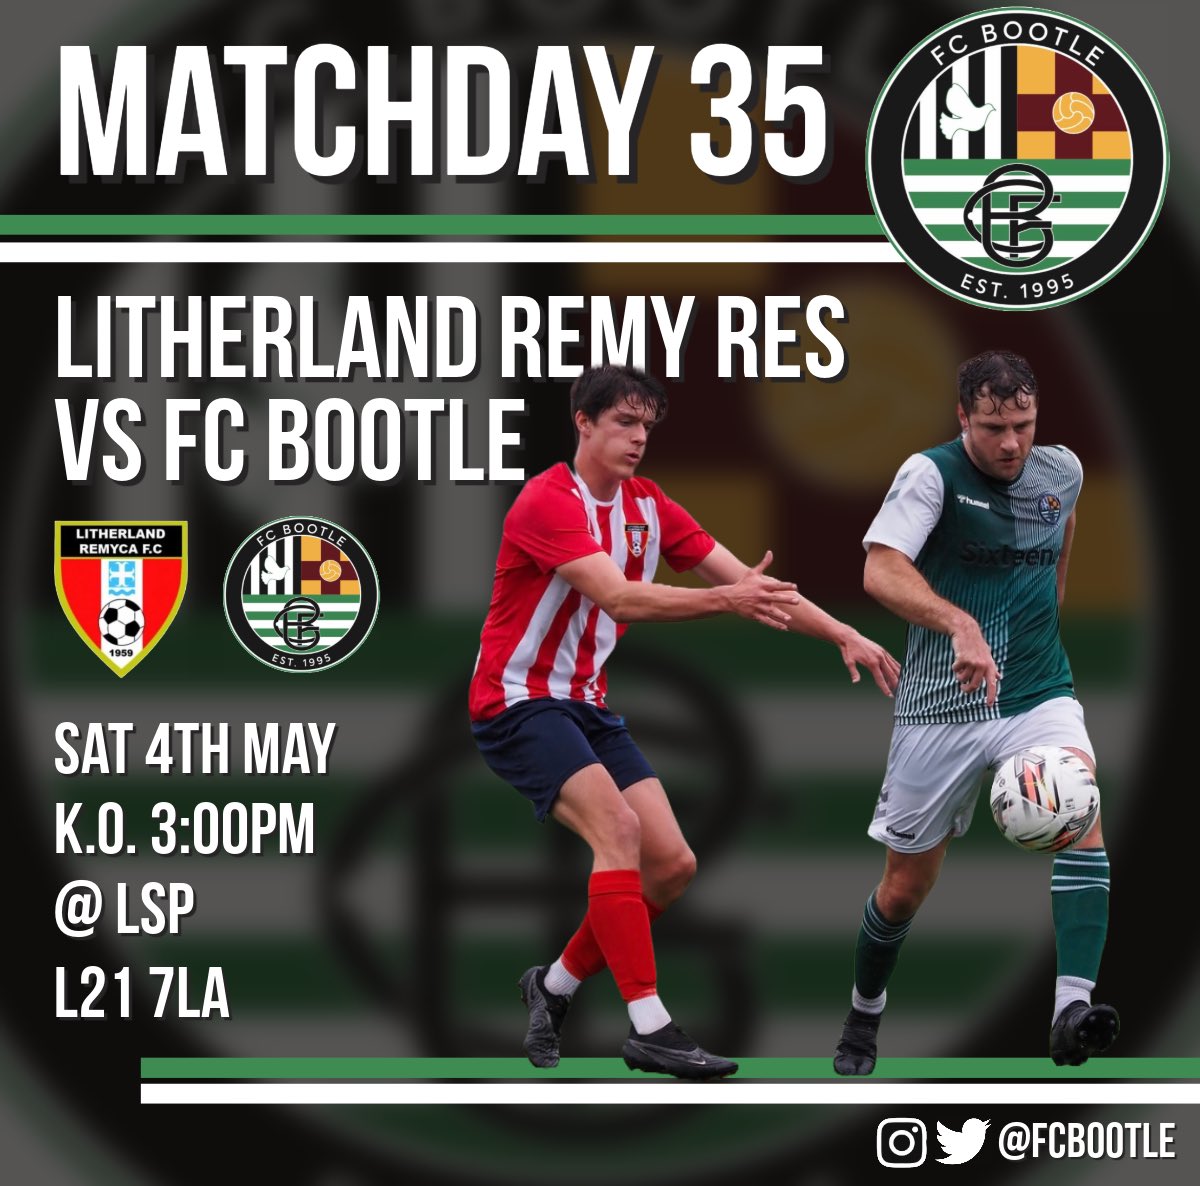 Next match… Our final fixture of the 23/24 @WestCheshireLge season sees us face @RemycaRes at Litherland Sports Park. It also marks @mikeya050604’s final appearance after 13 years at the club. A fitting venue as he made the majority of his FCB appearances at LSP. 💚💚